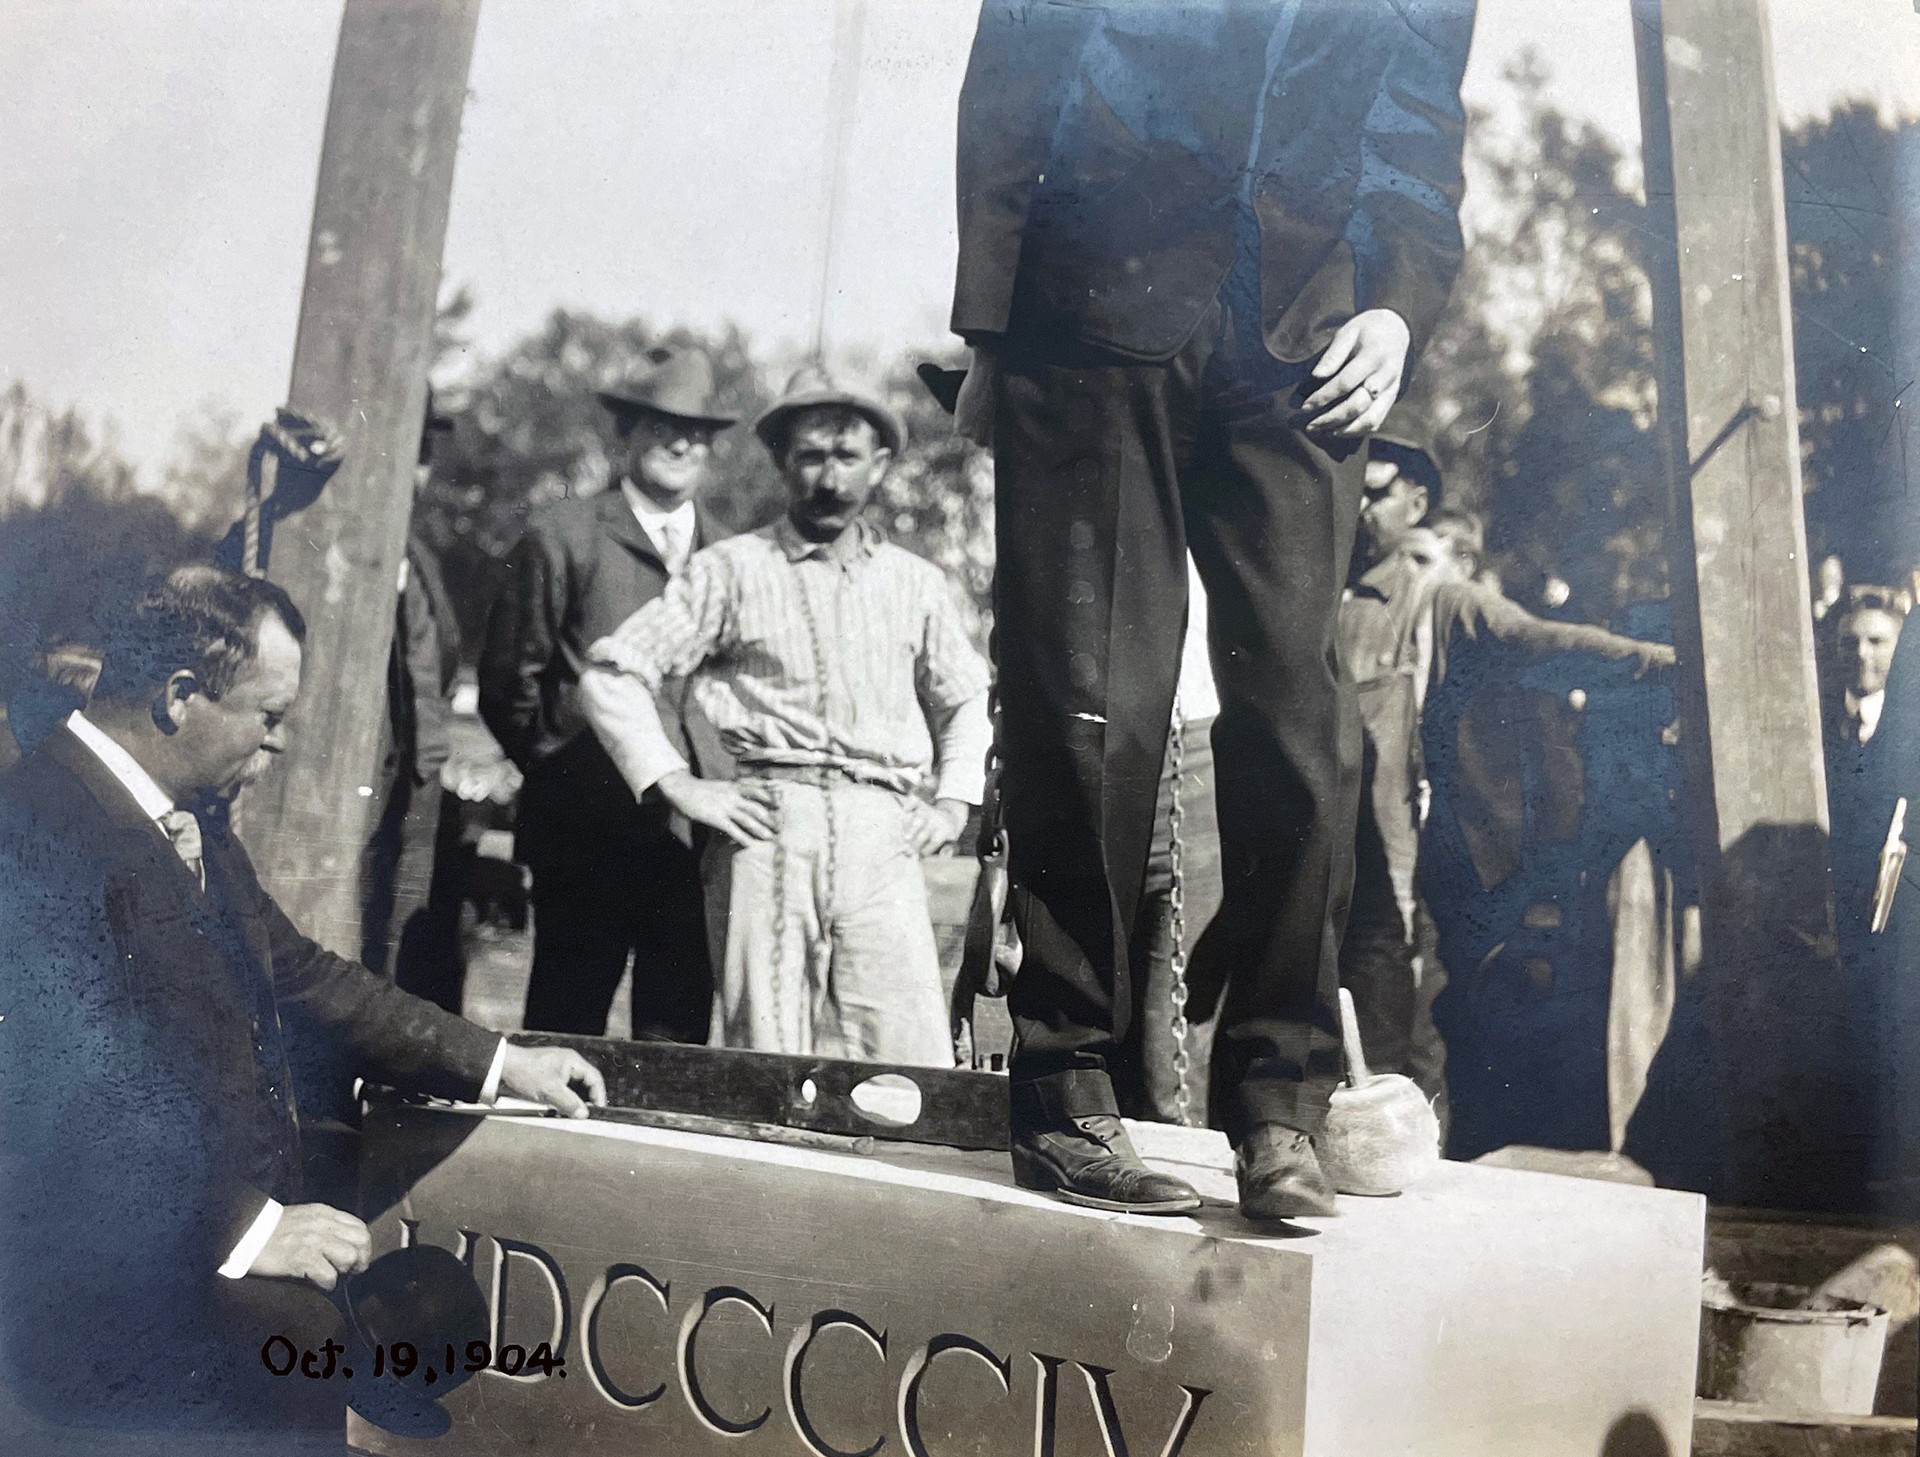 Worker at Goldwin Smith Hall cornerstone ceremony in 1904